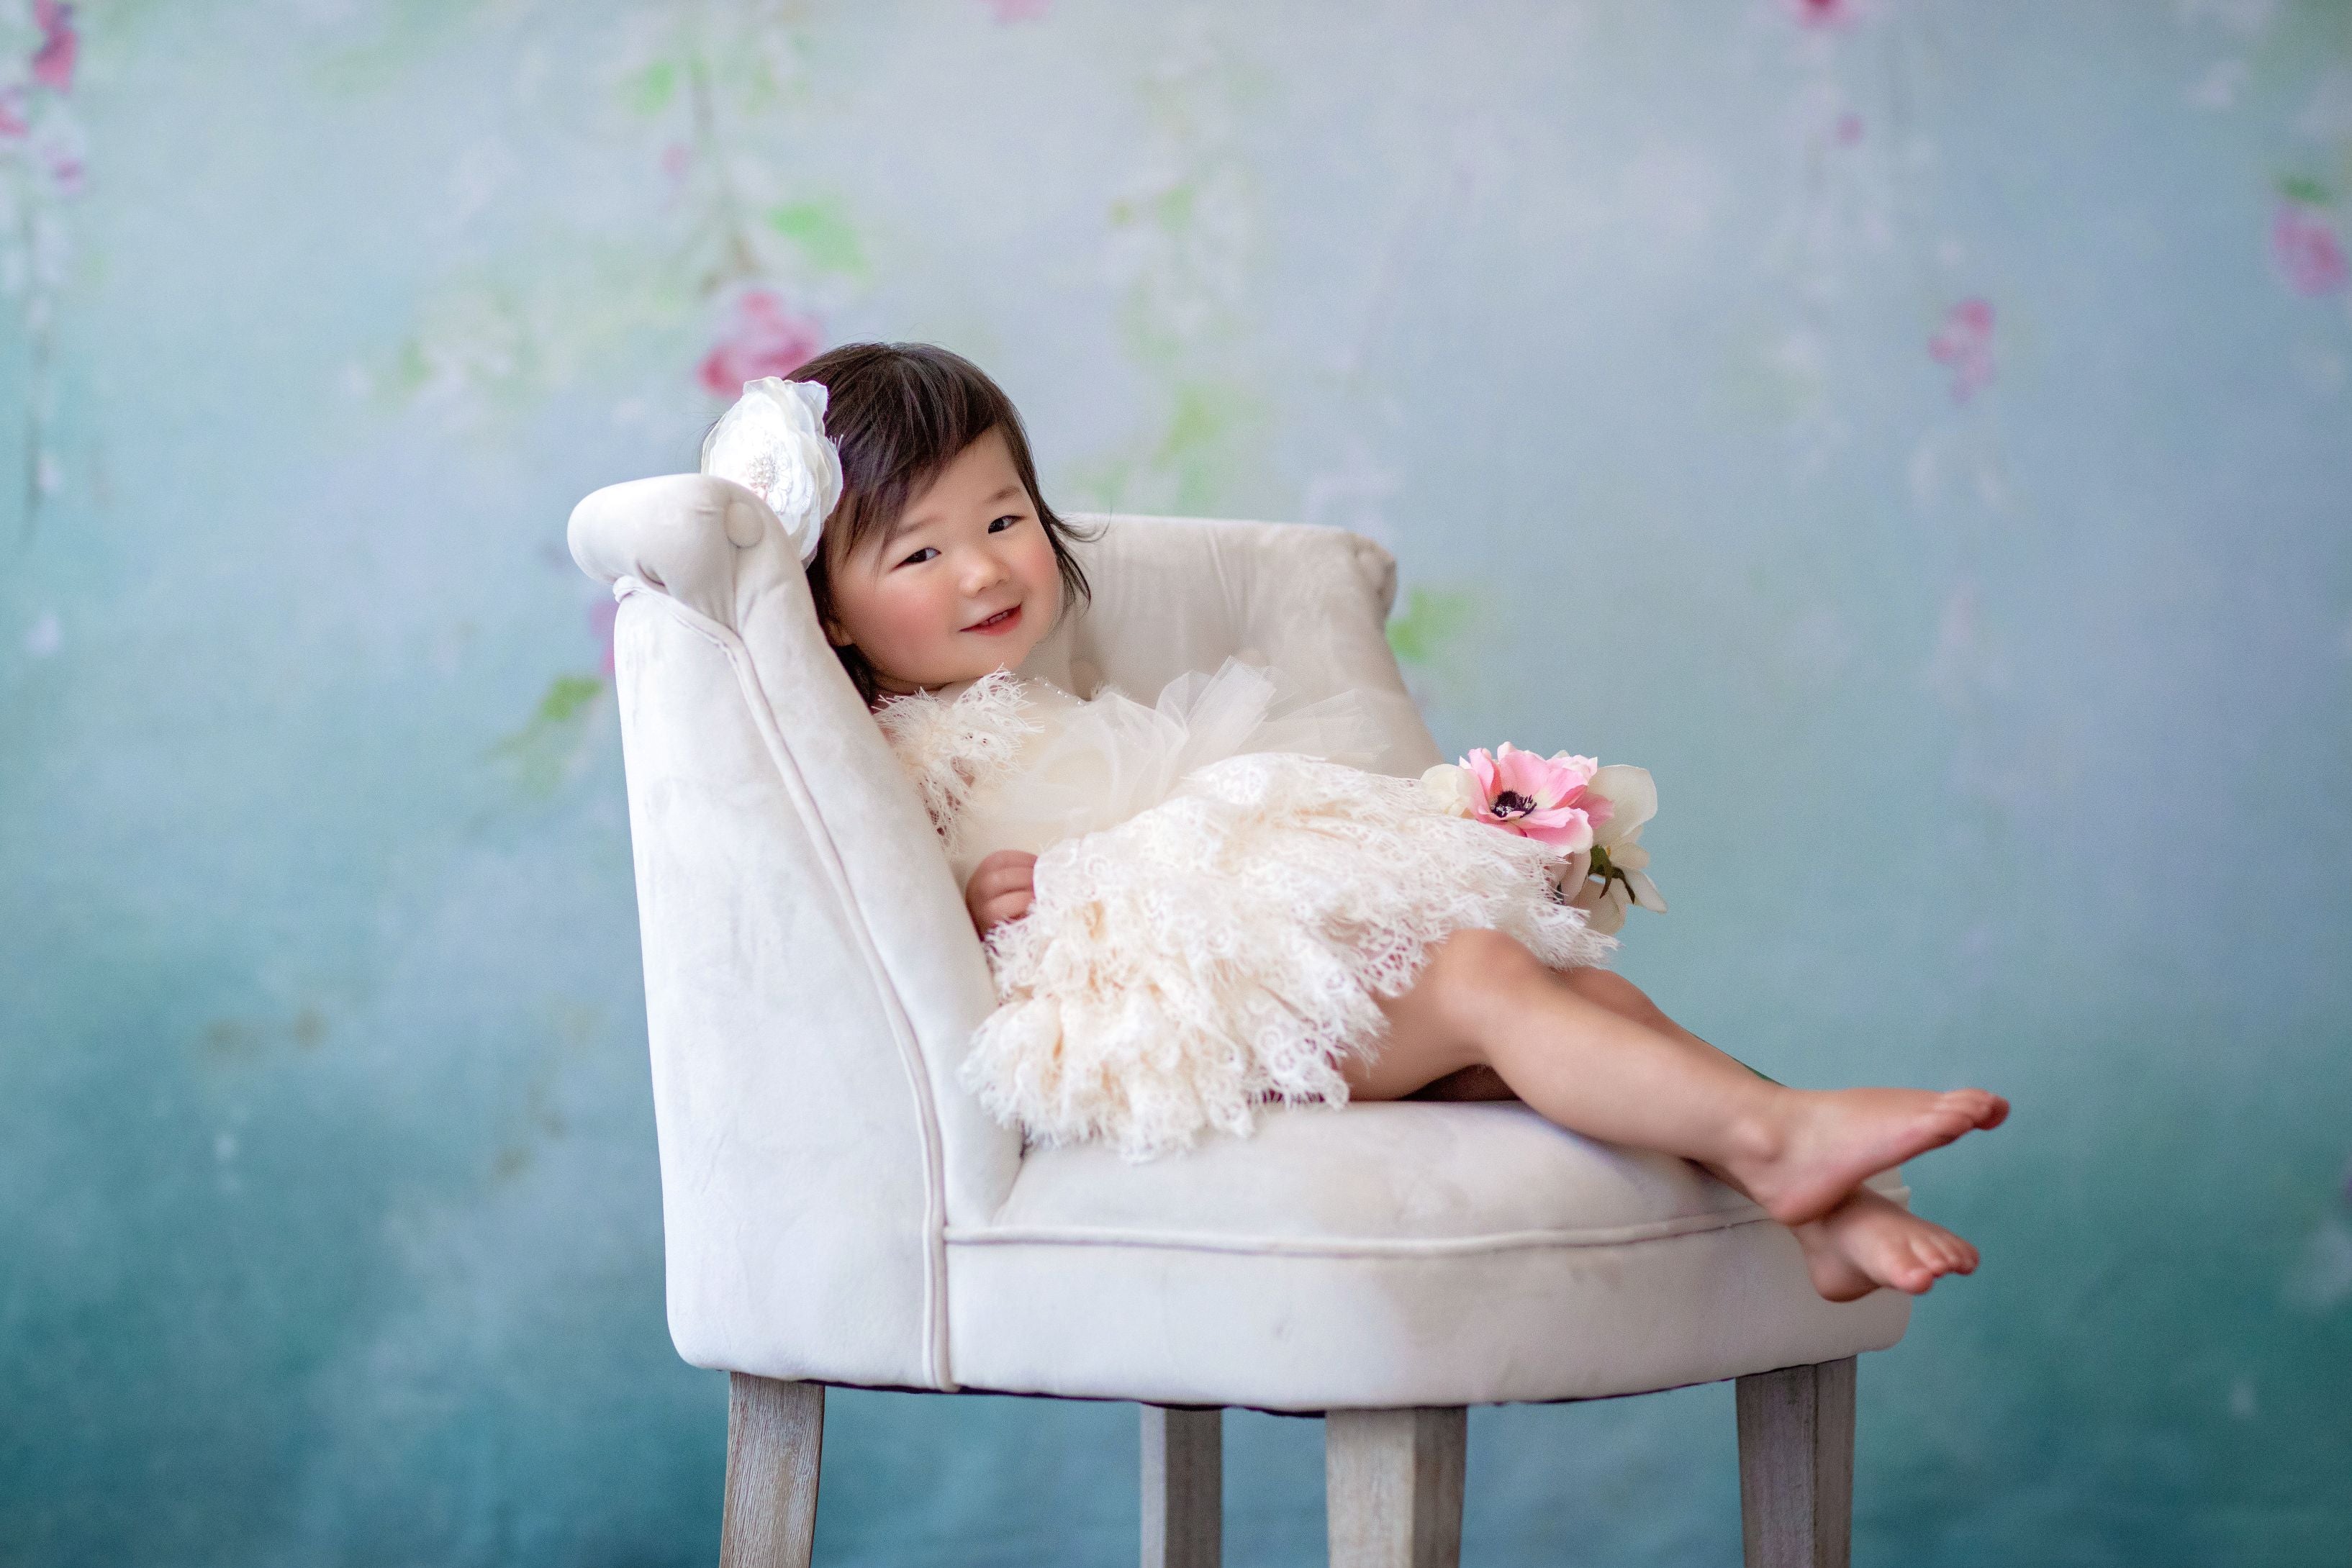 Couture Rental Baby Gown "Alyssa" -  Petal Length Dress  - ( 12 month - 18 month)